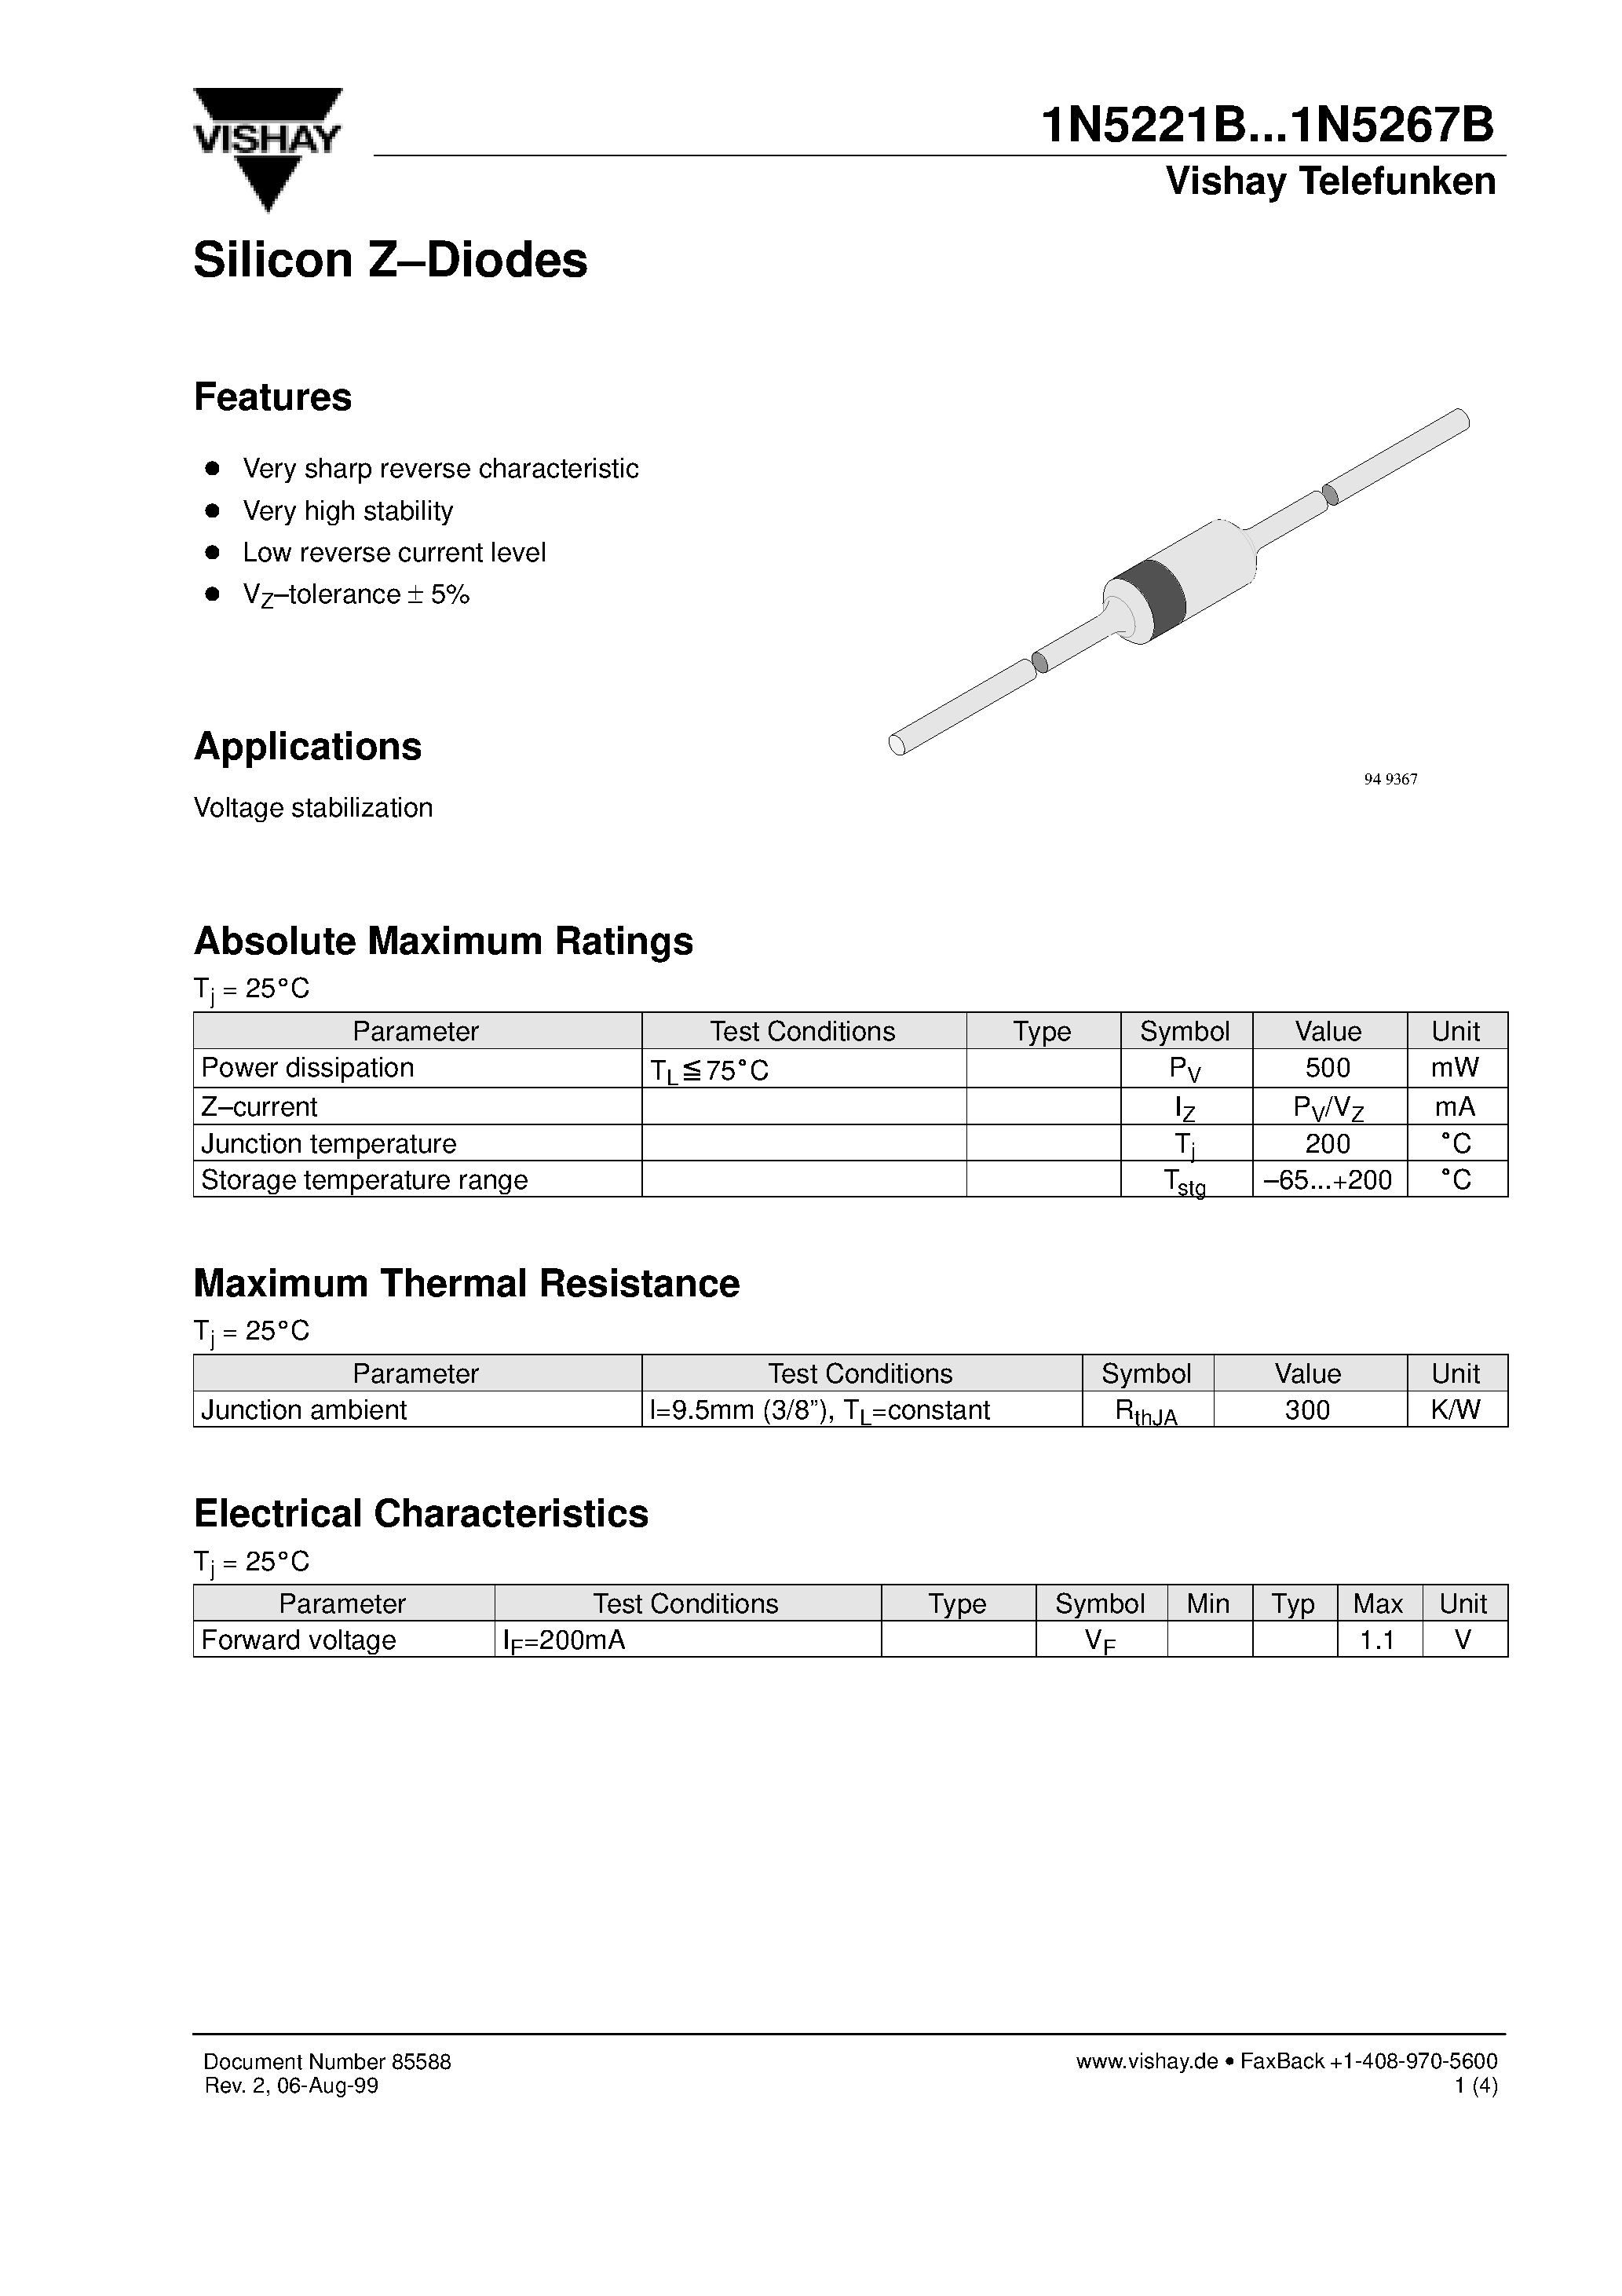 Datasheet 1N5243B - Silicon Z-Diodes page 1